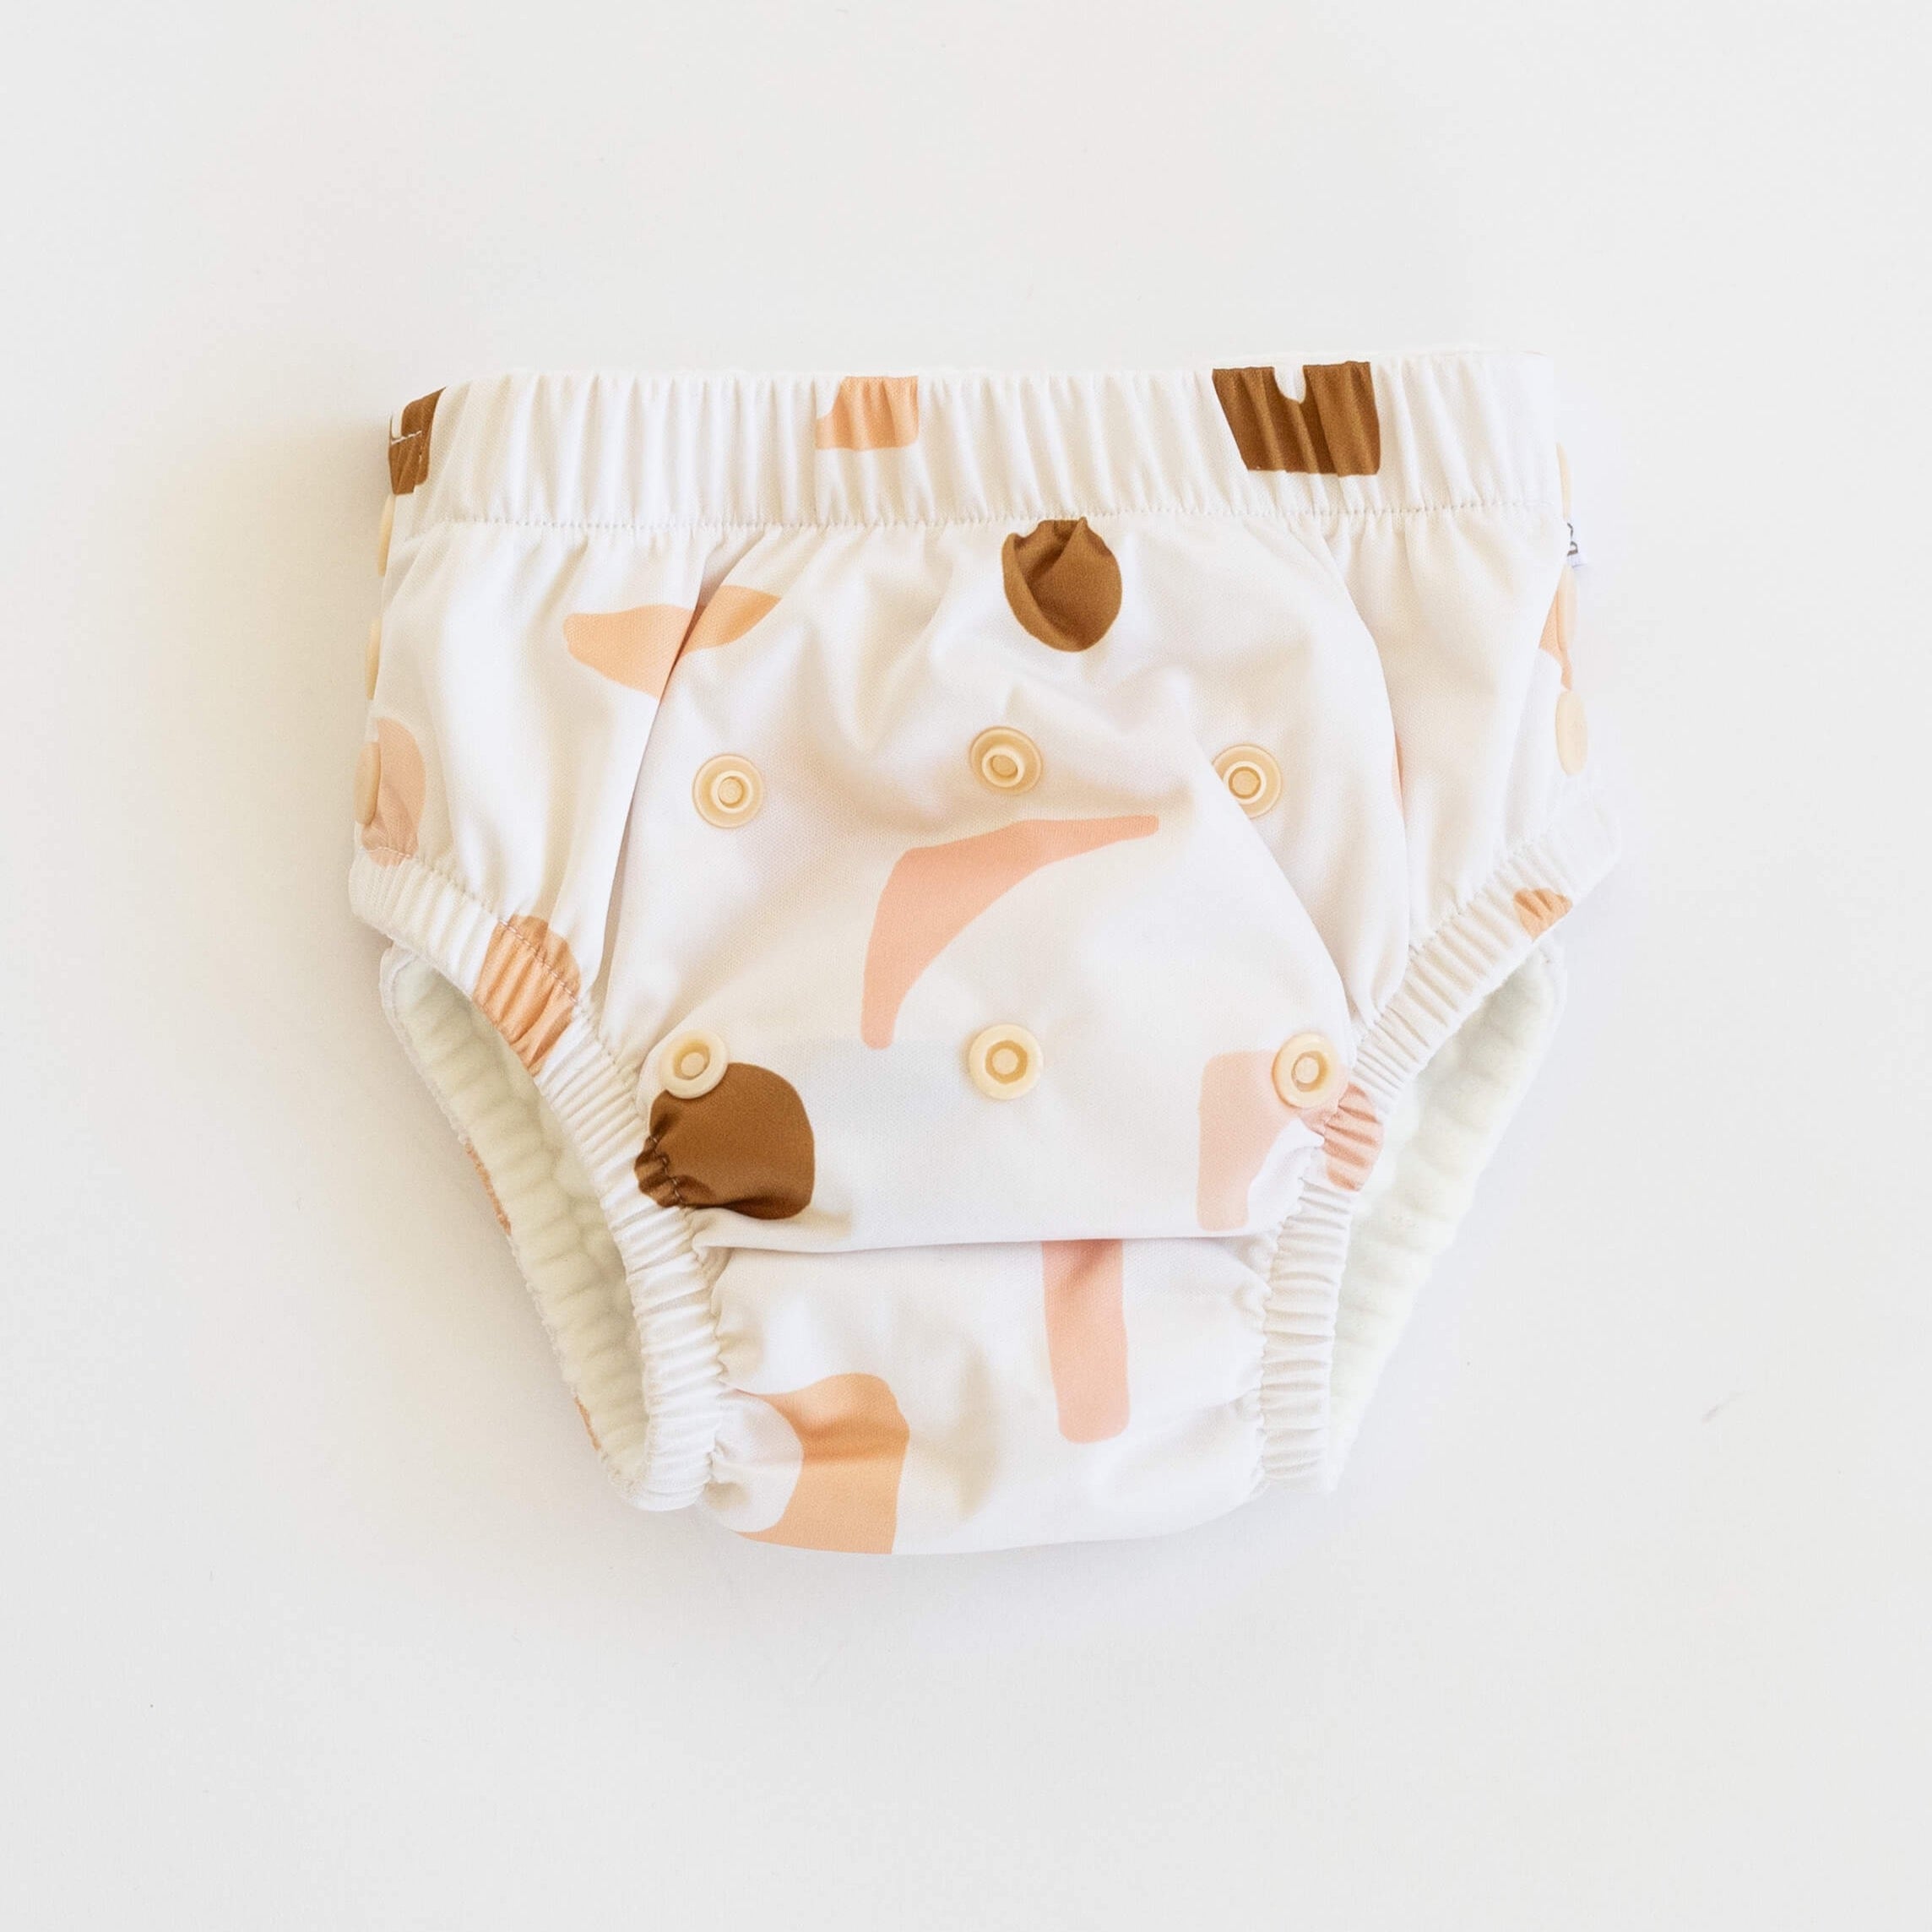 Quick Look- New Super Undies Pull on Trainers 2.0 – Dirty Diaper Laundry